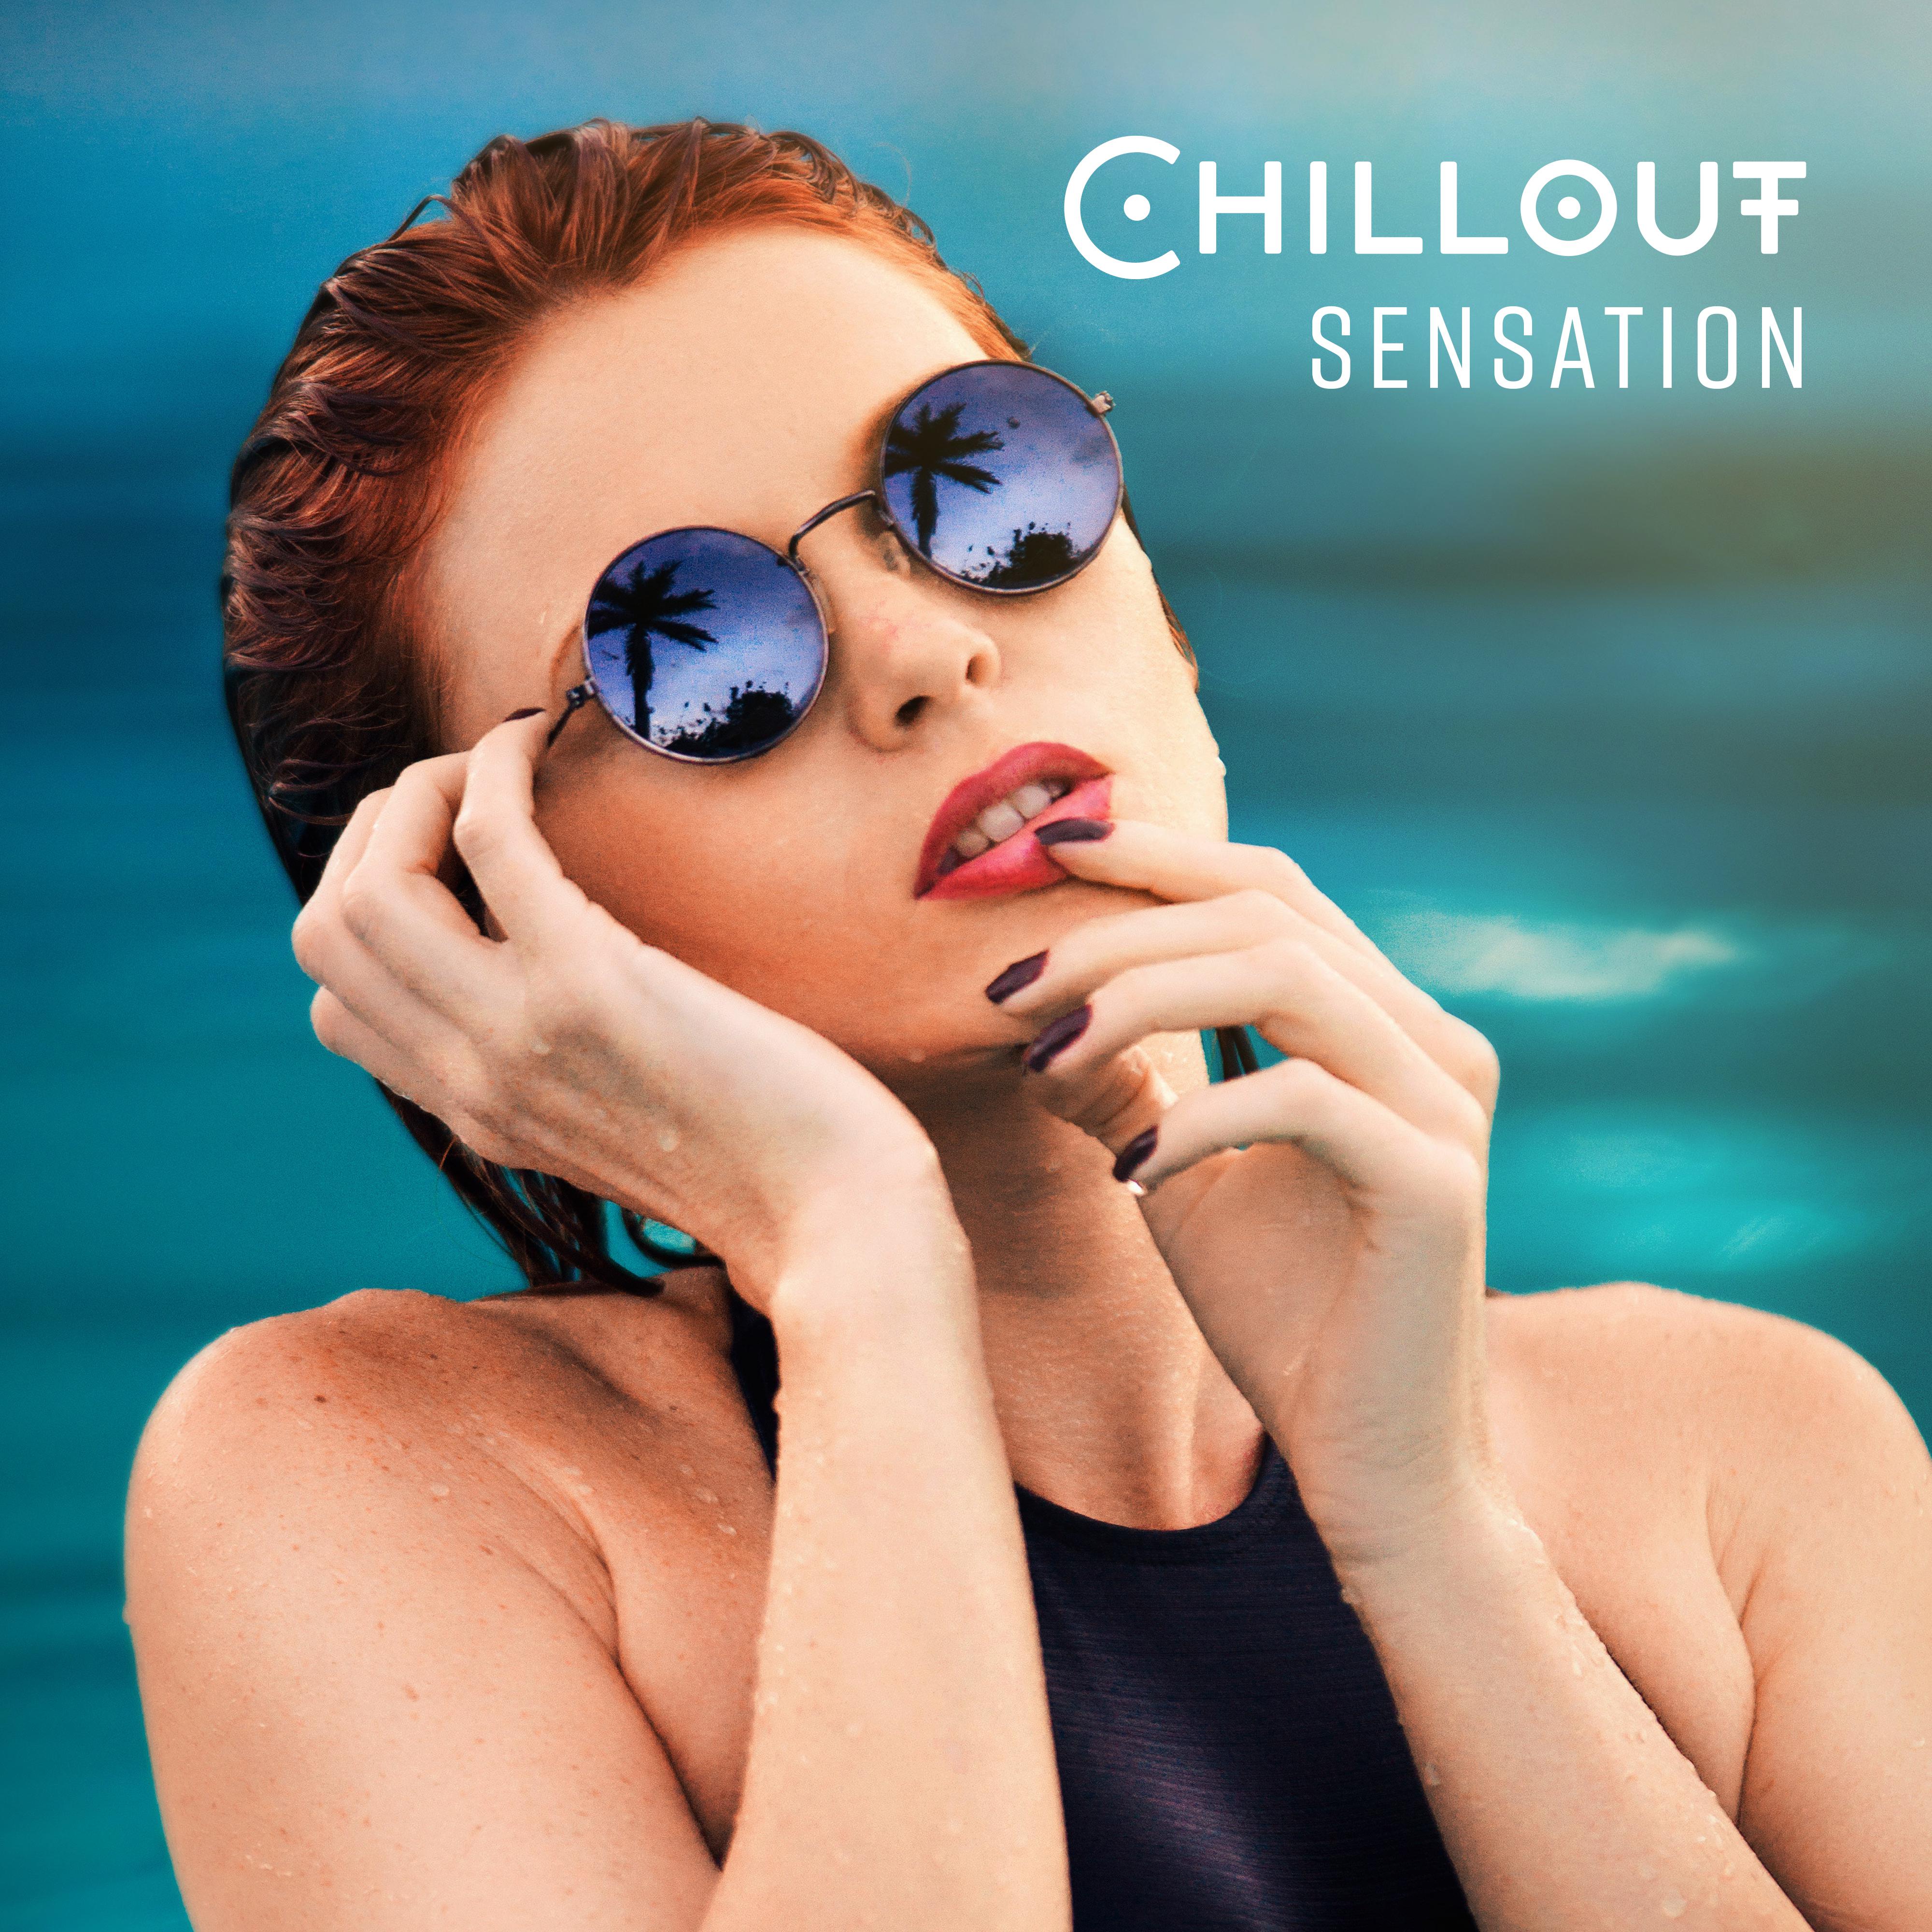 Chillout Sensation: Fresh Chillout Music, Latest Party Songs, House Rhythms, Dancing Beats 2019